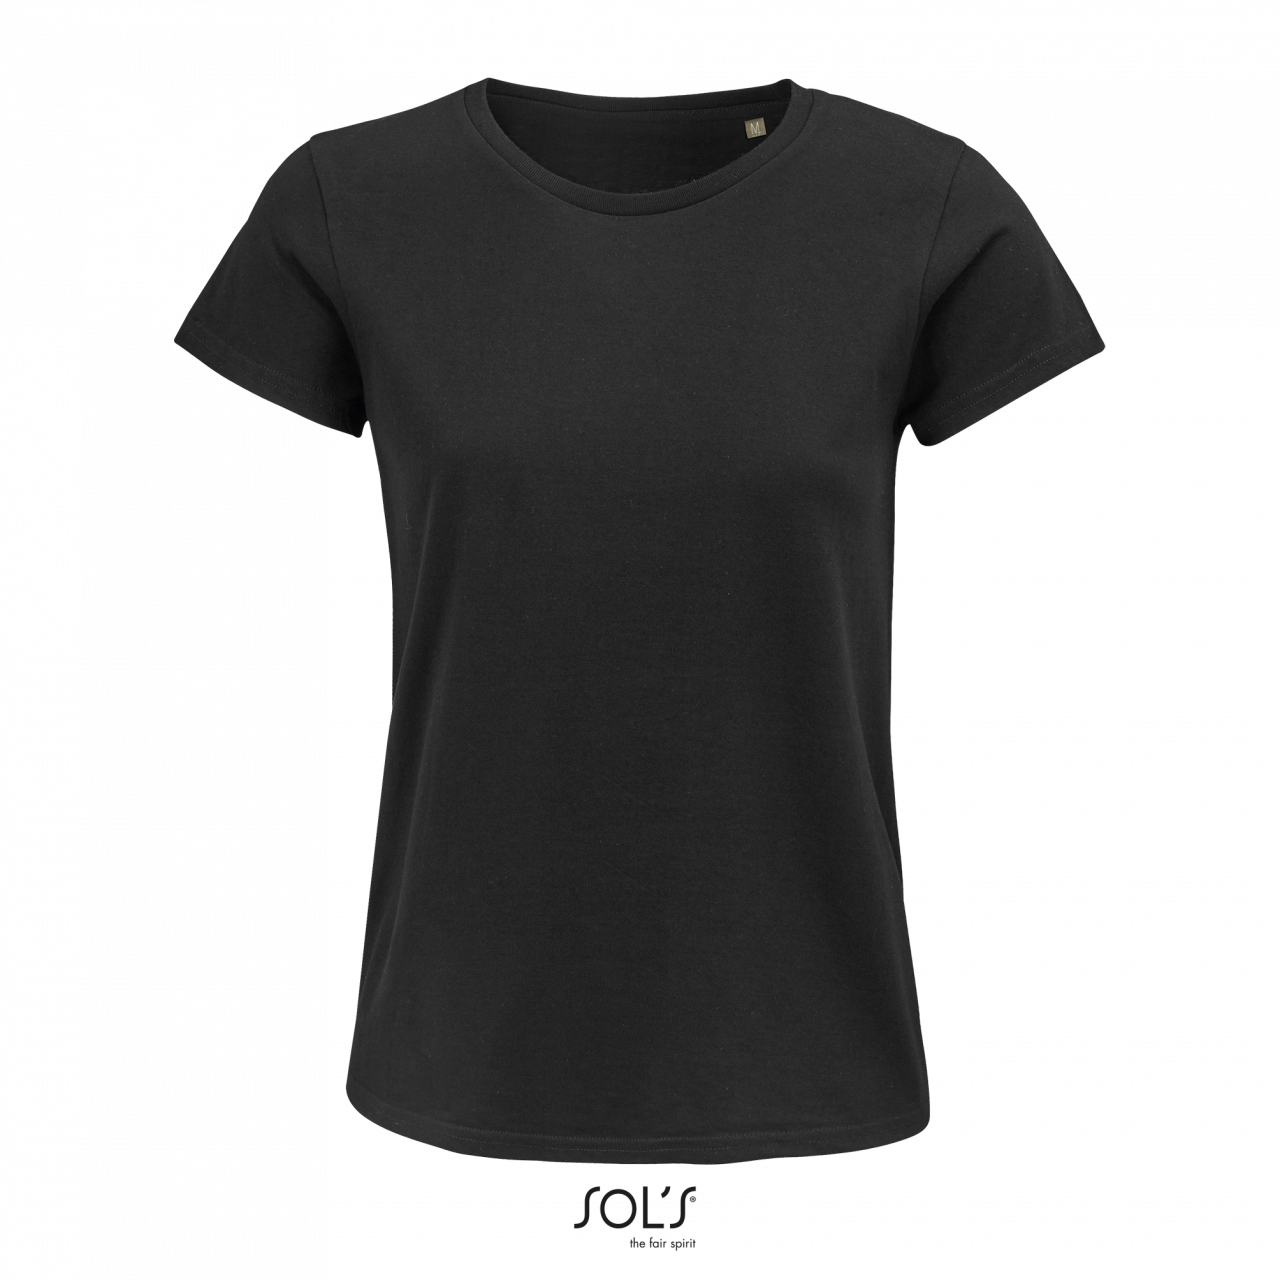 Sol's Crusader Women - Round-neck Fitted Jersey T-shirt - Sol's Crusader Women - Round-neck Fitted Jersey T-shirt - Black